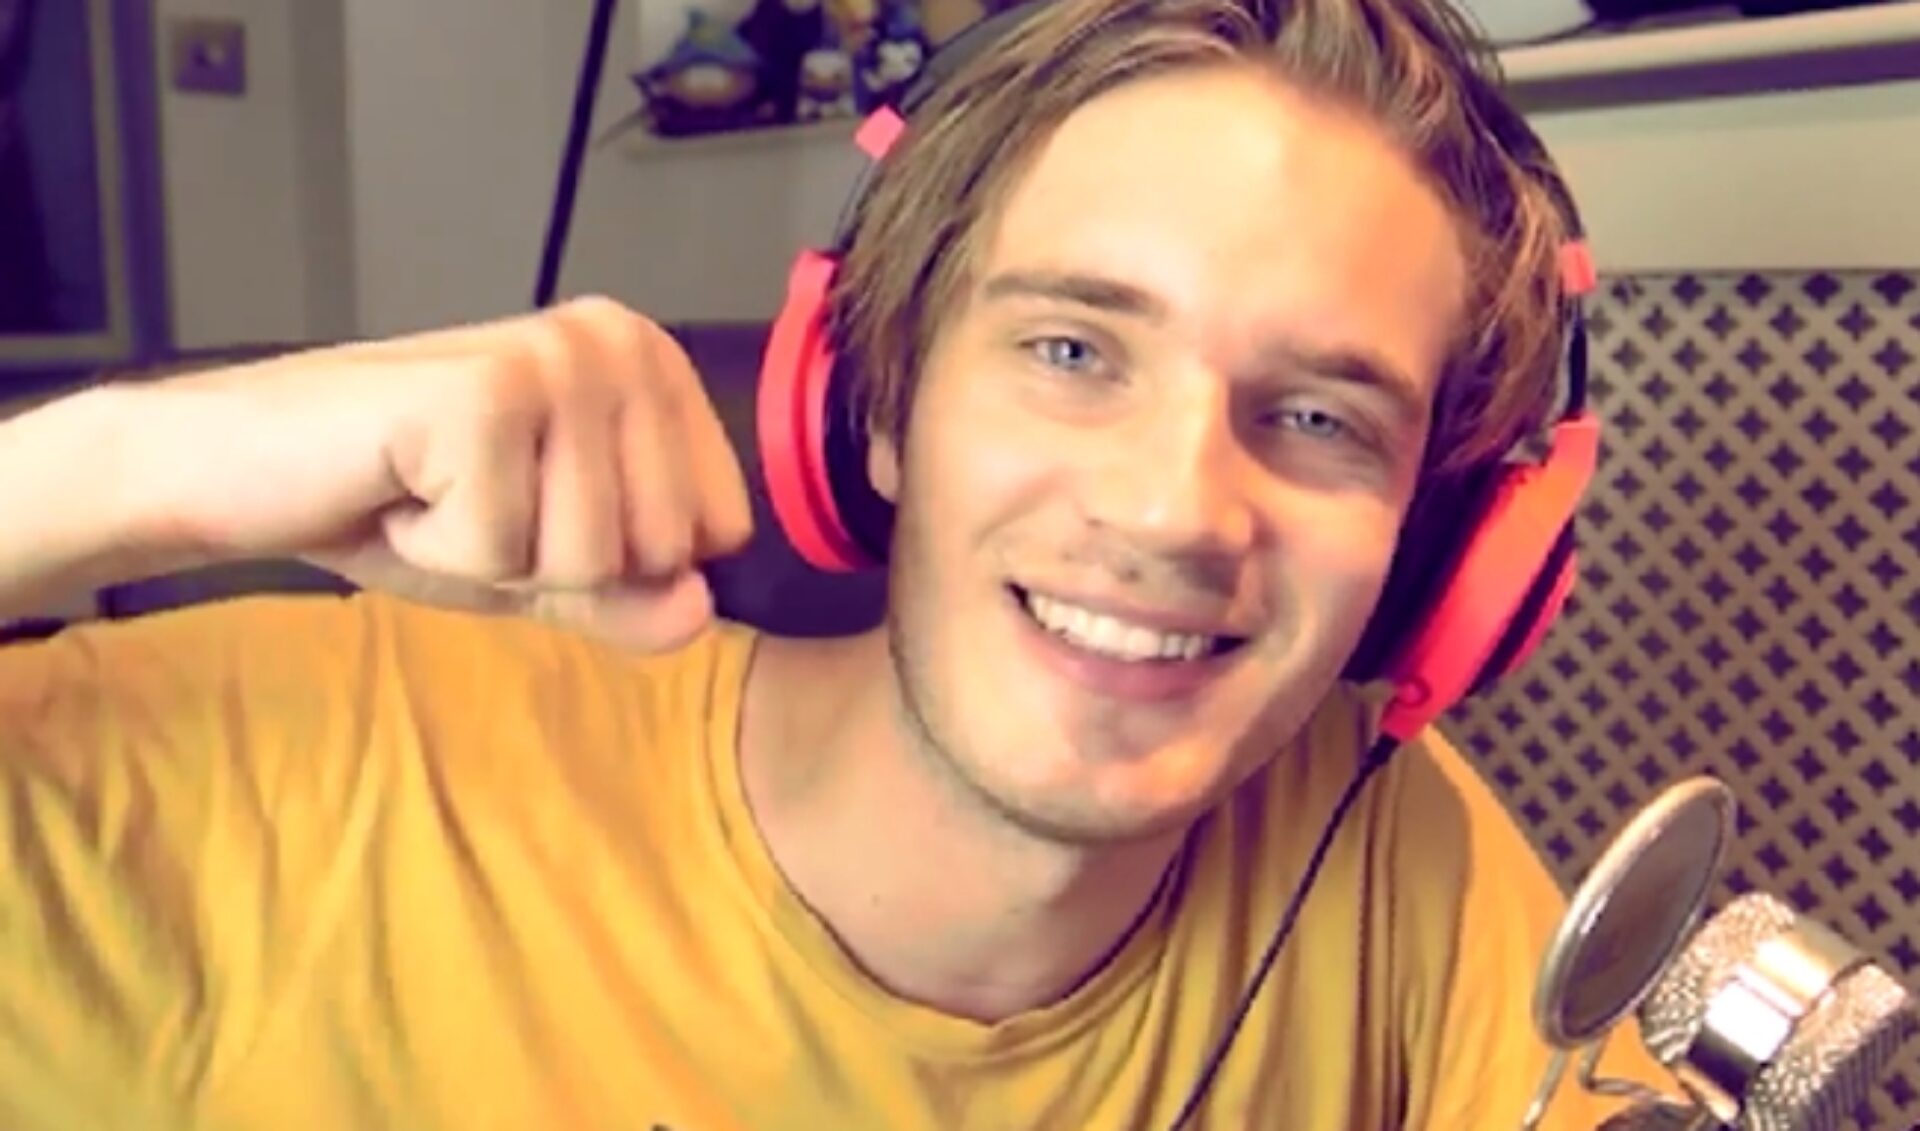 The Unstoppable Force Named PewDiePie Has Hit 30 Million YouTube Subscribers